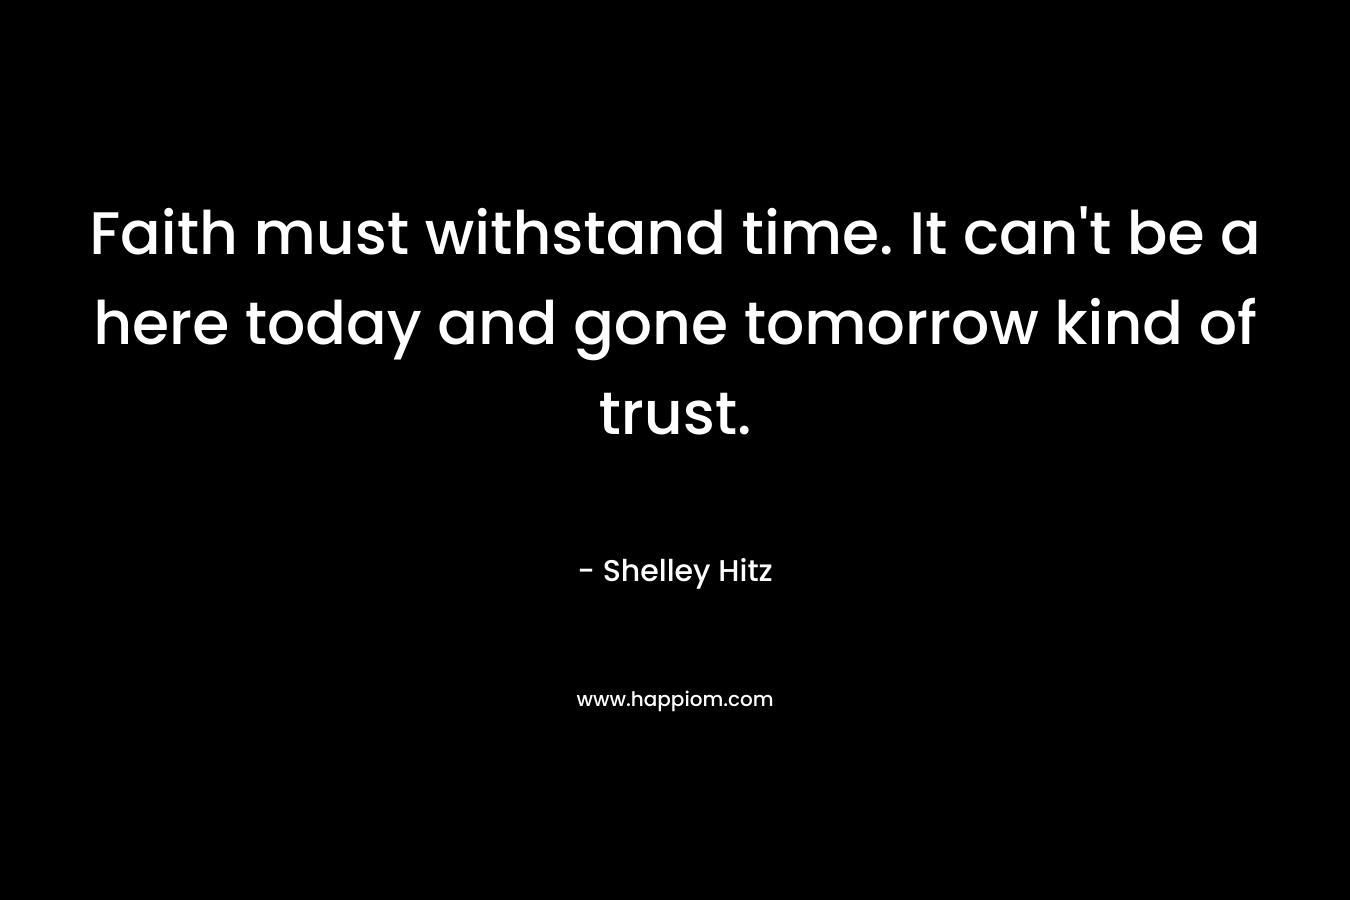 Faith must withstand time. It can't be a here today and gone tomorrow kind of trust.